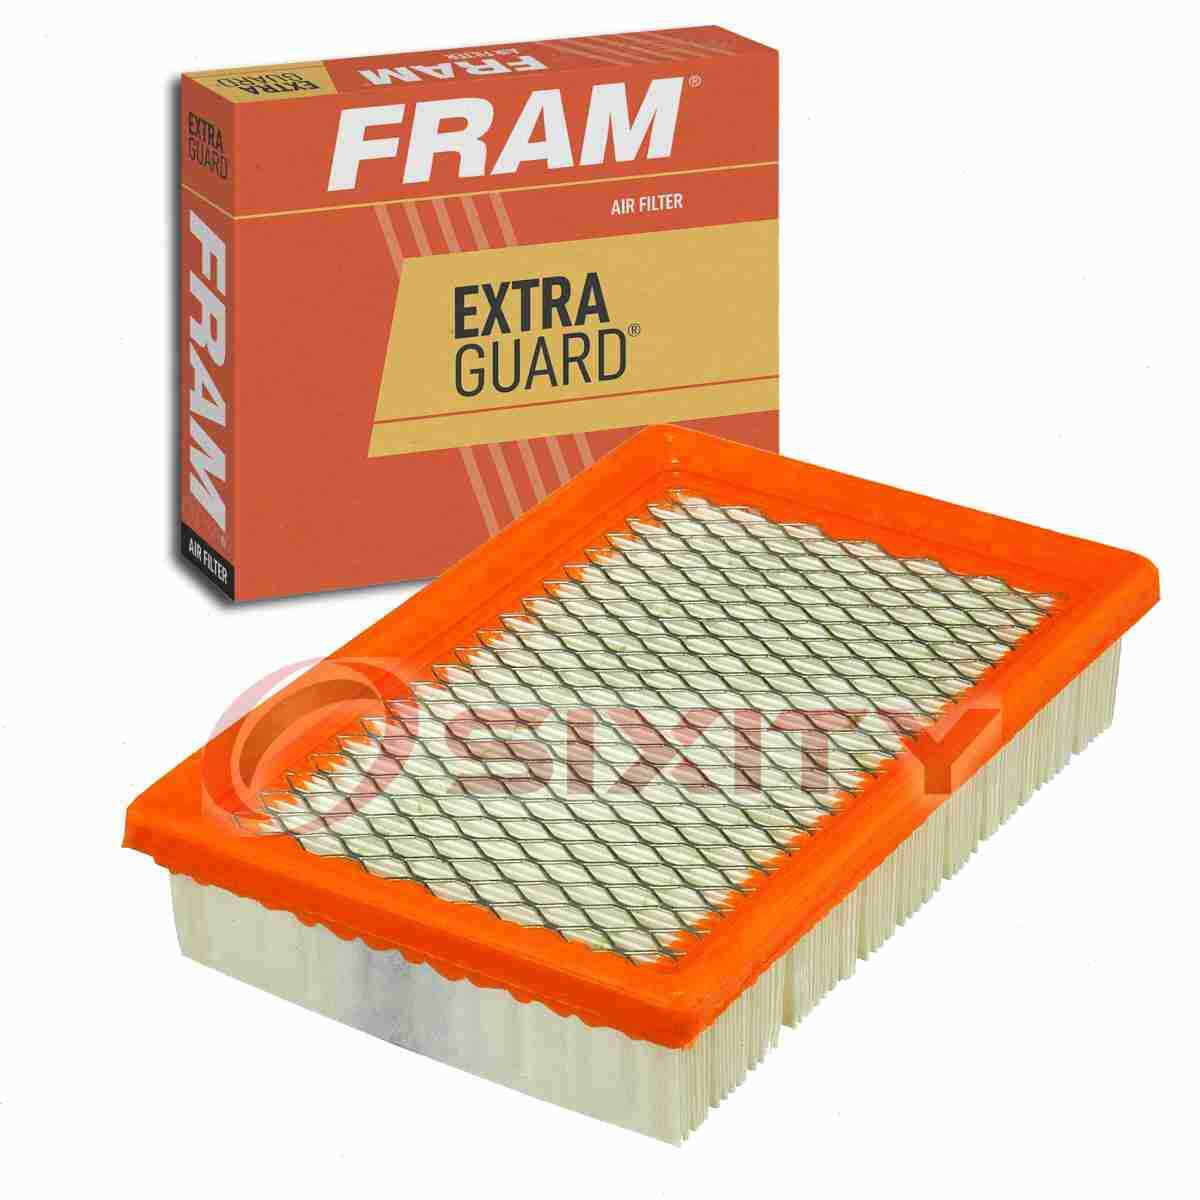 FRAM Extra Guard Air Filter for 1987-1989 Plymouth Sundance 2.2L 2.5L L4 uo